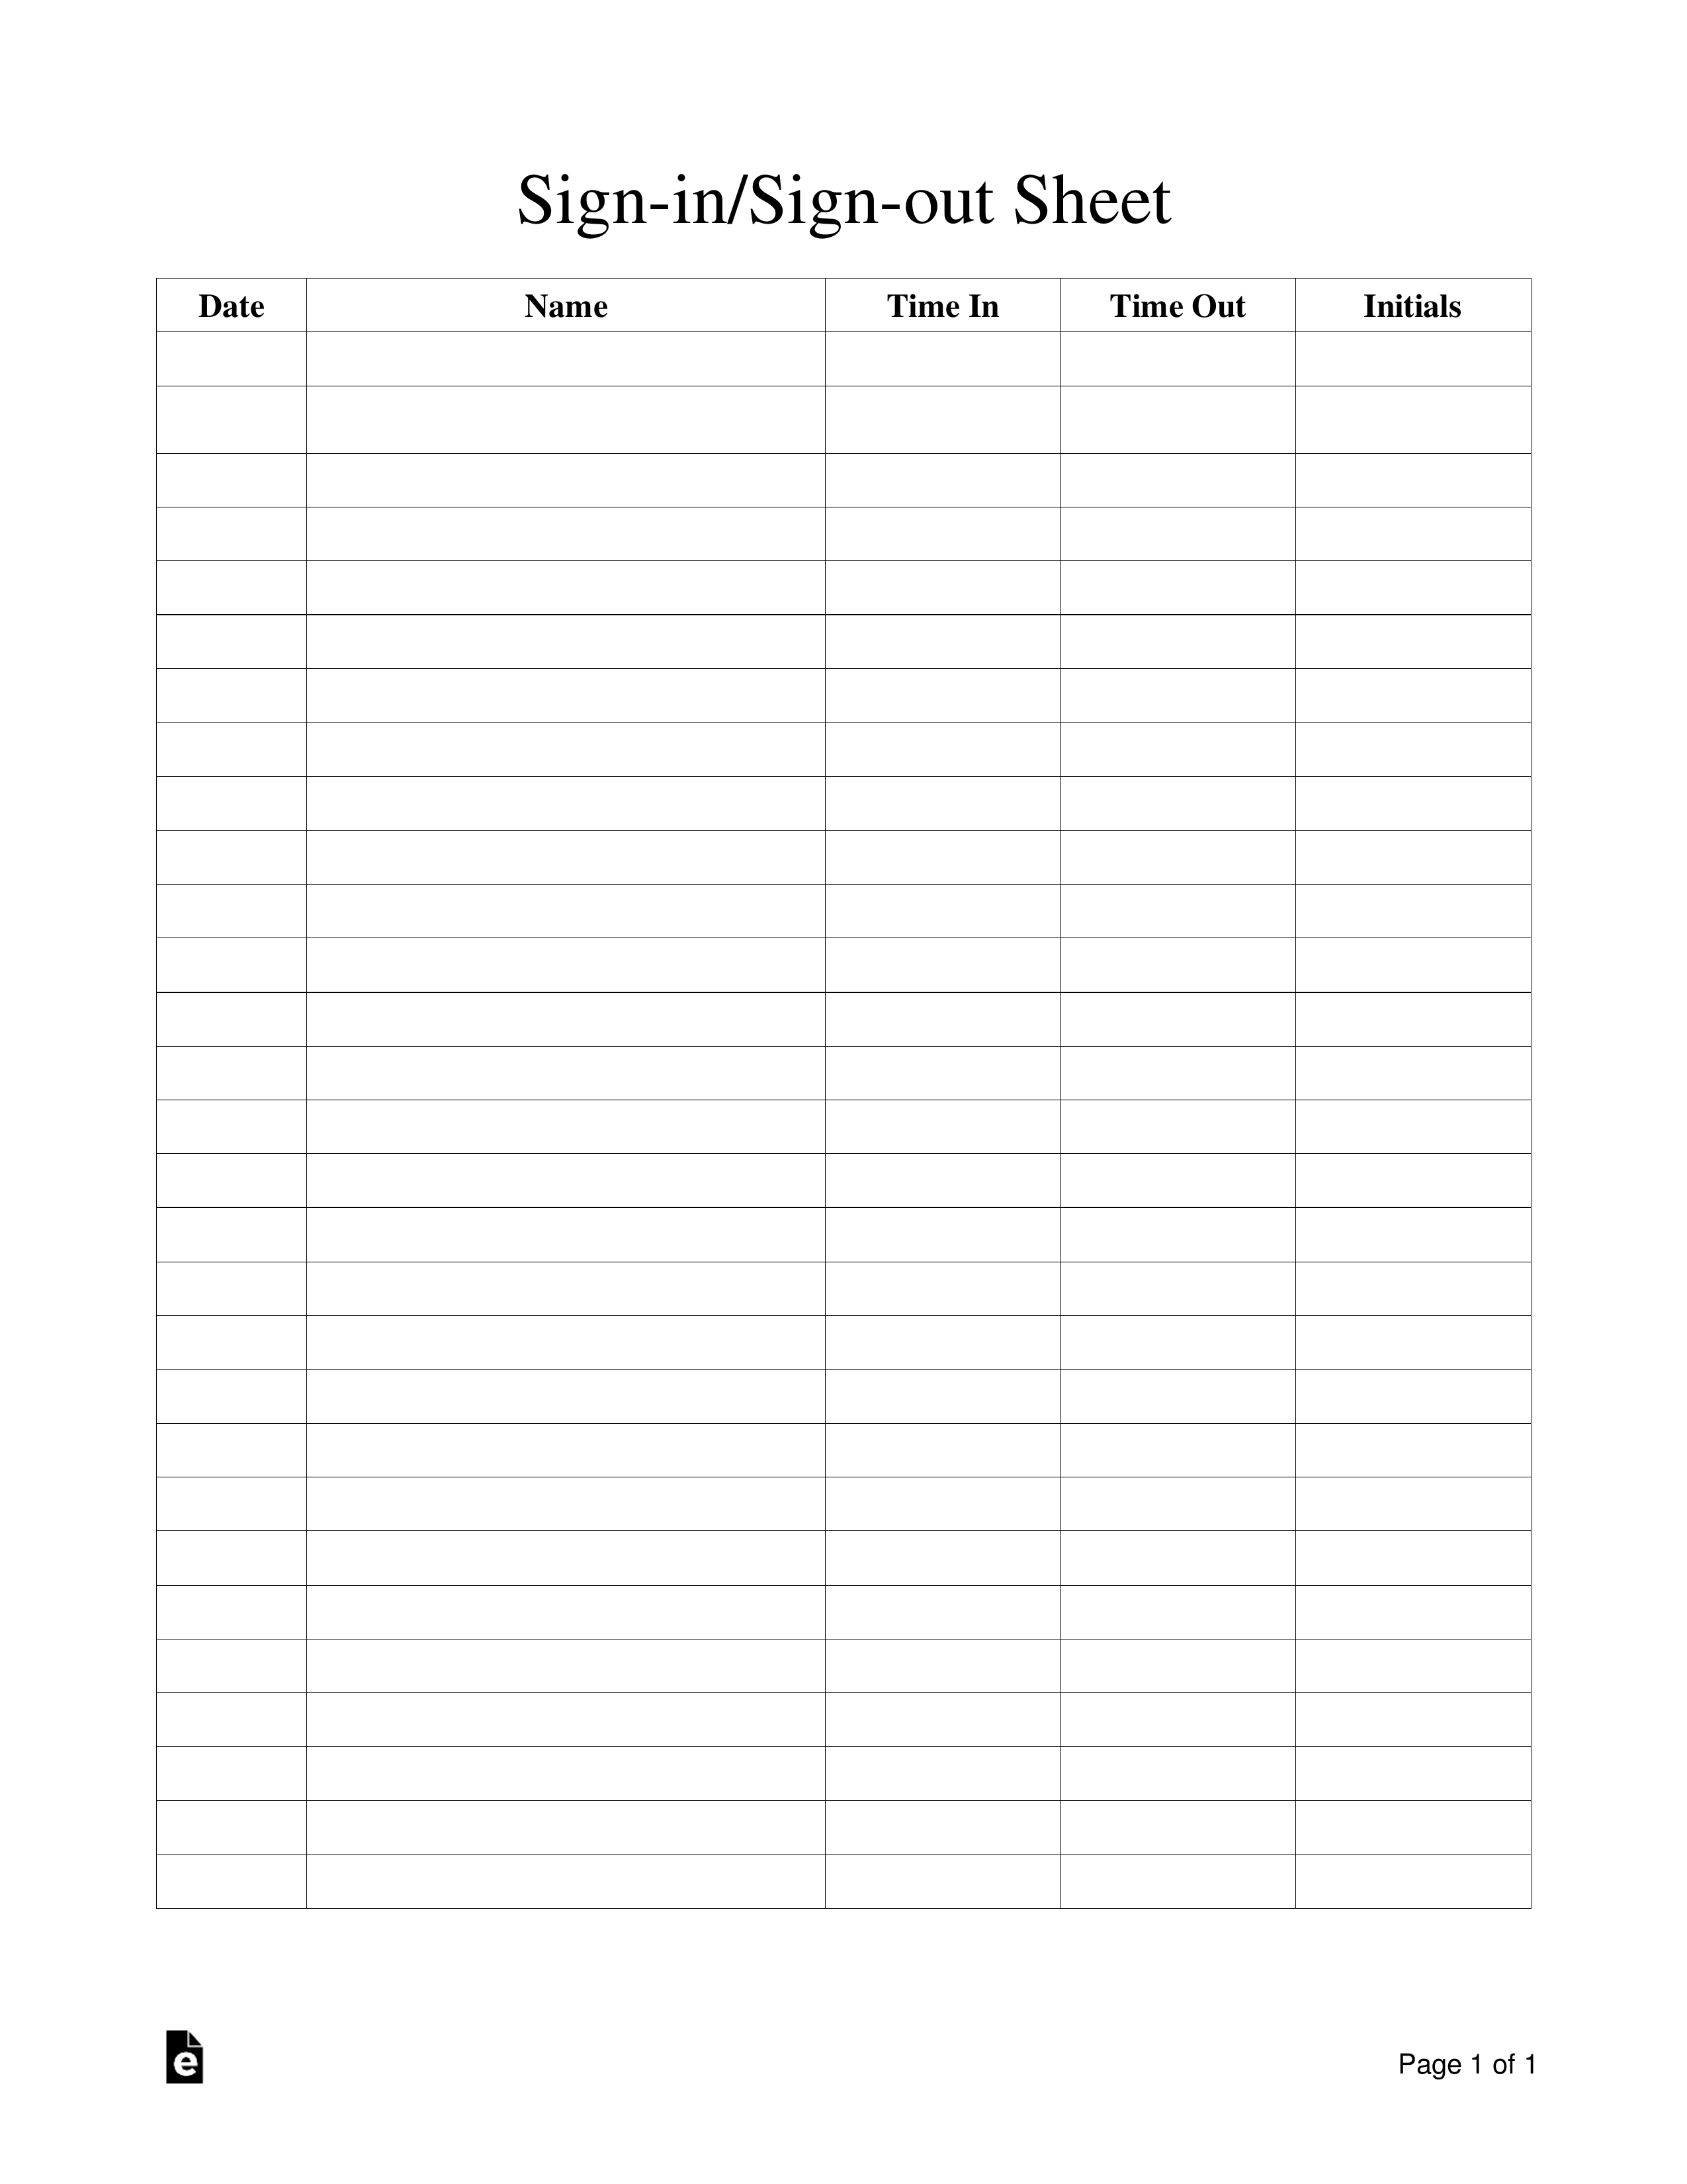 Free Sign-in/Sign-out Sheet Template - PDF | Word – eForms